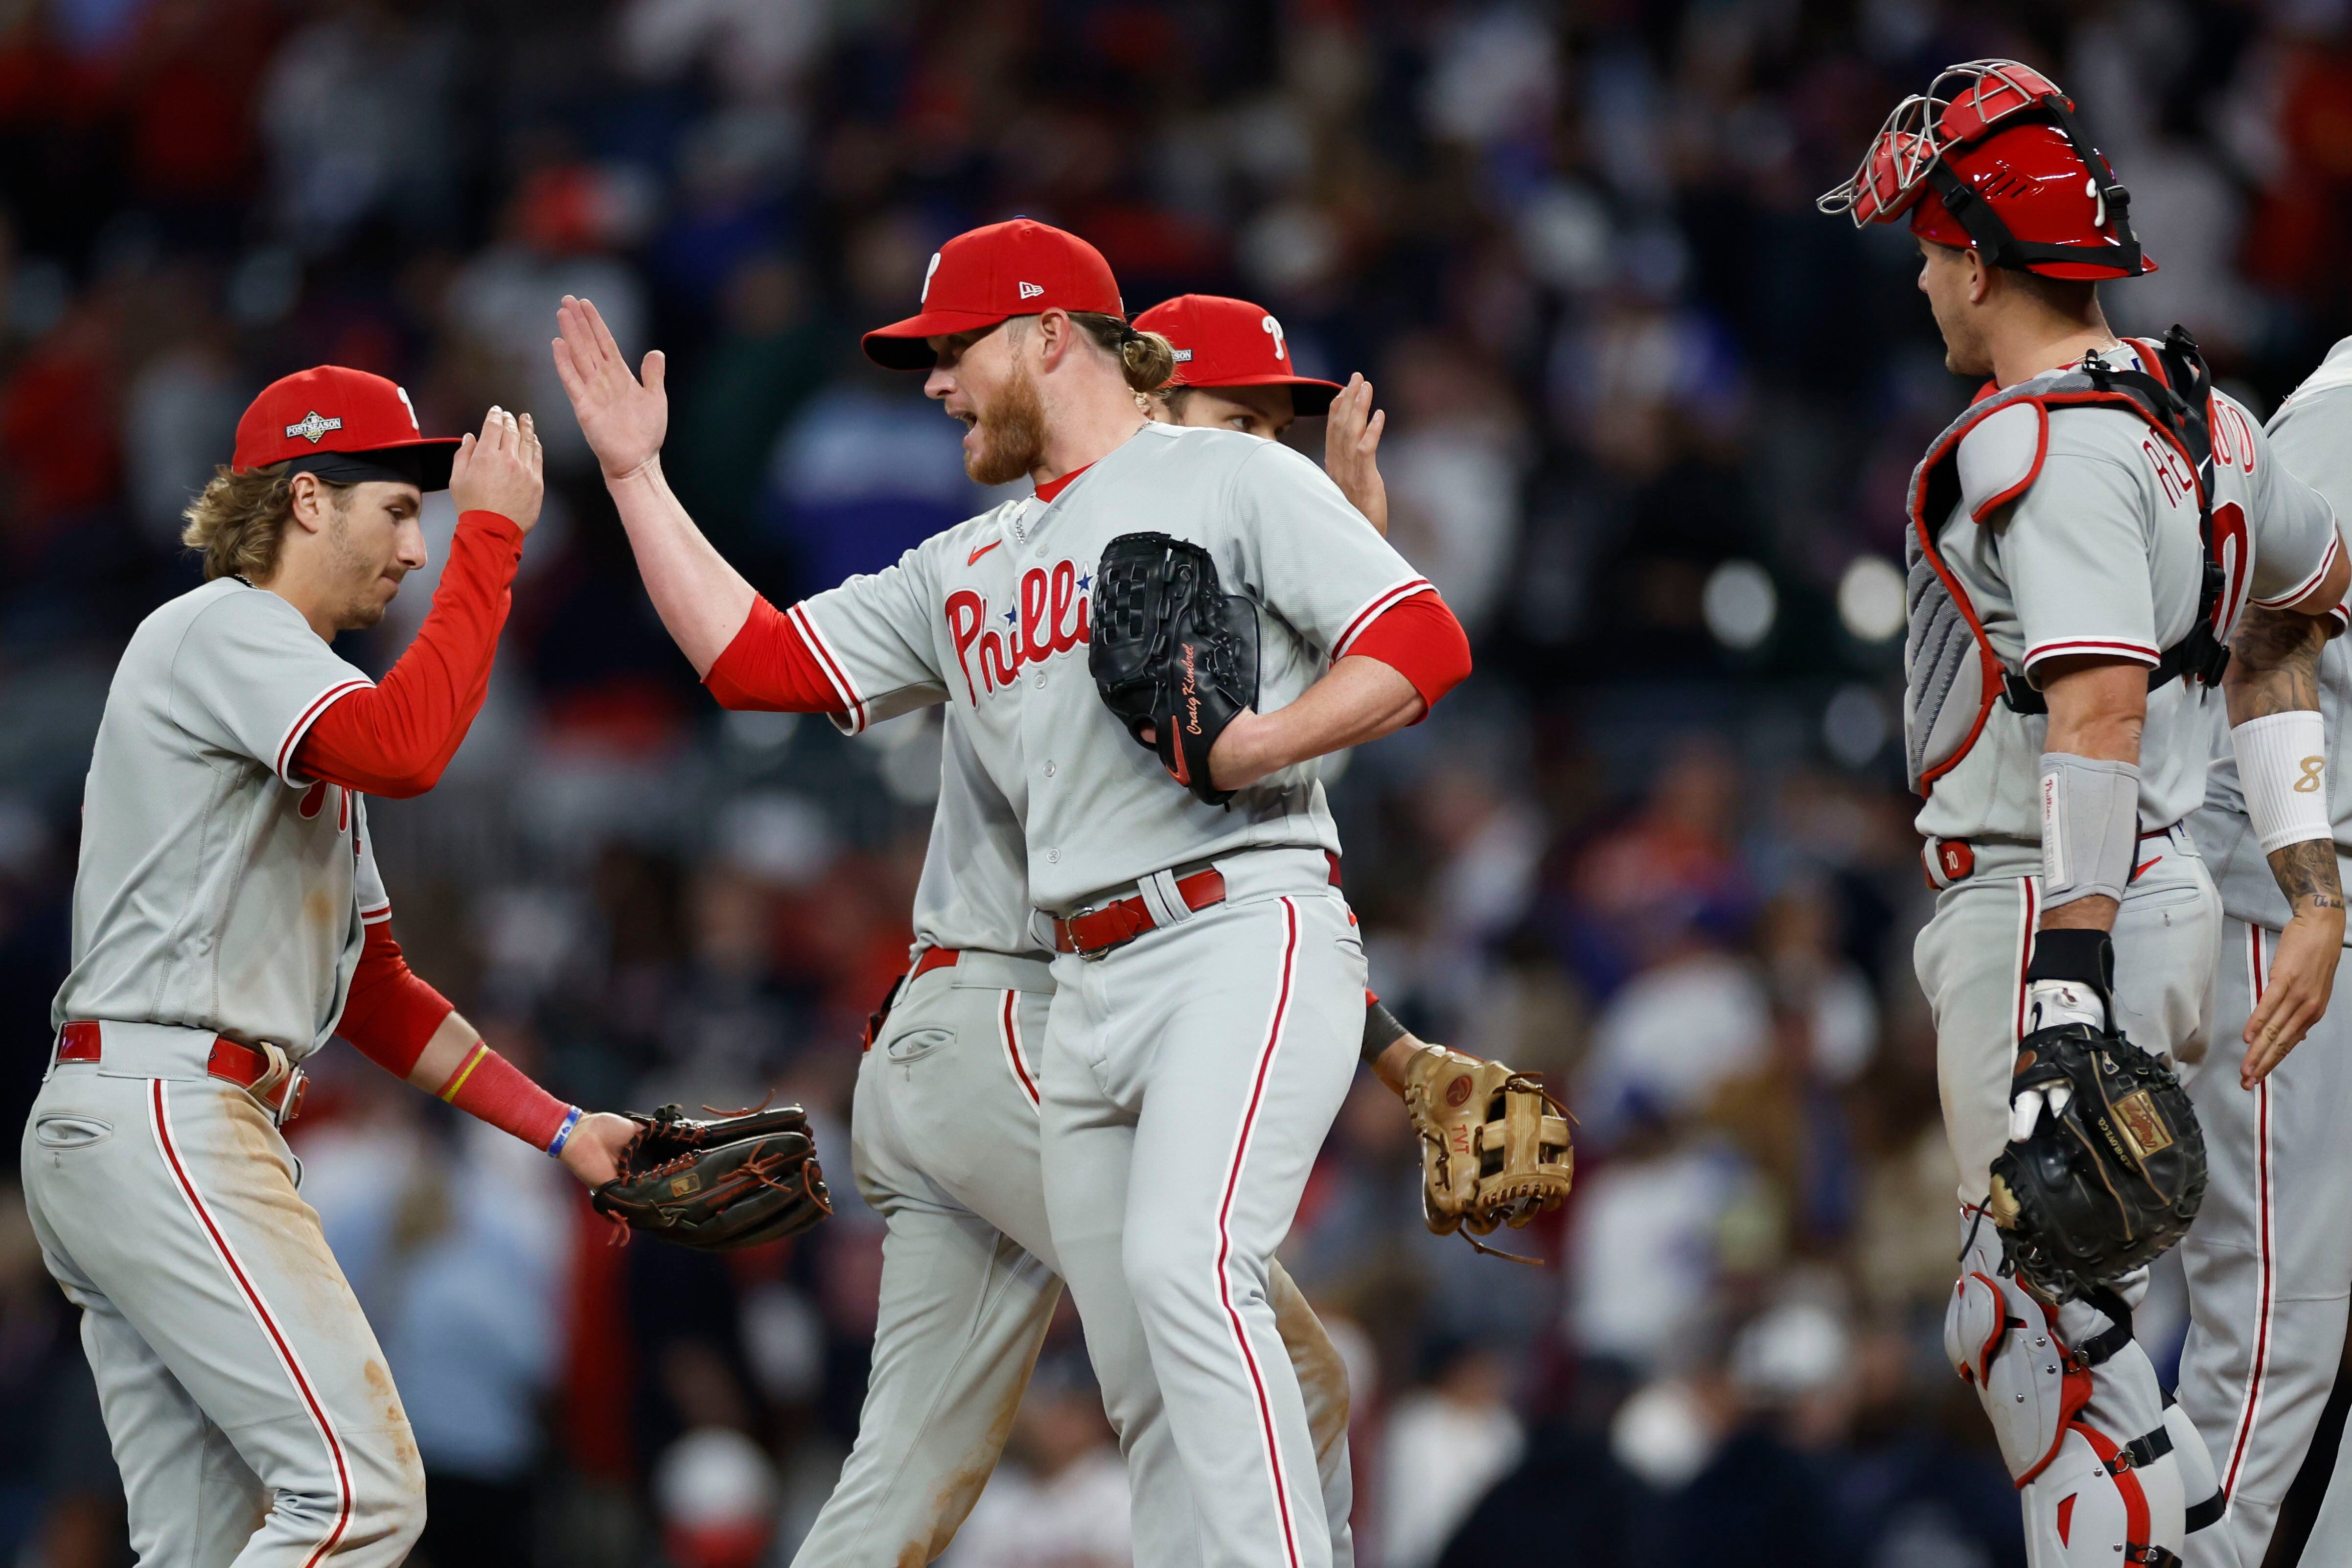 A Defense of Craig Kimbrel's Ninth-Inning Red Sox Drama, the Best